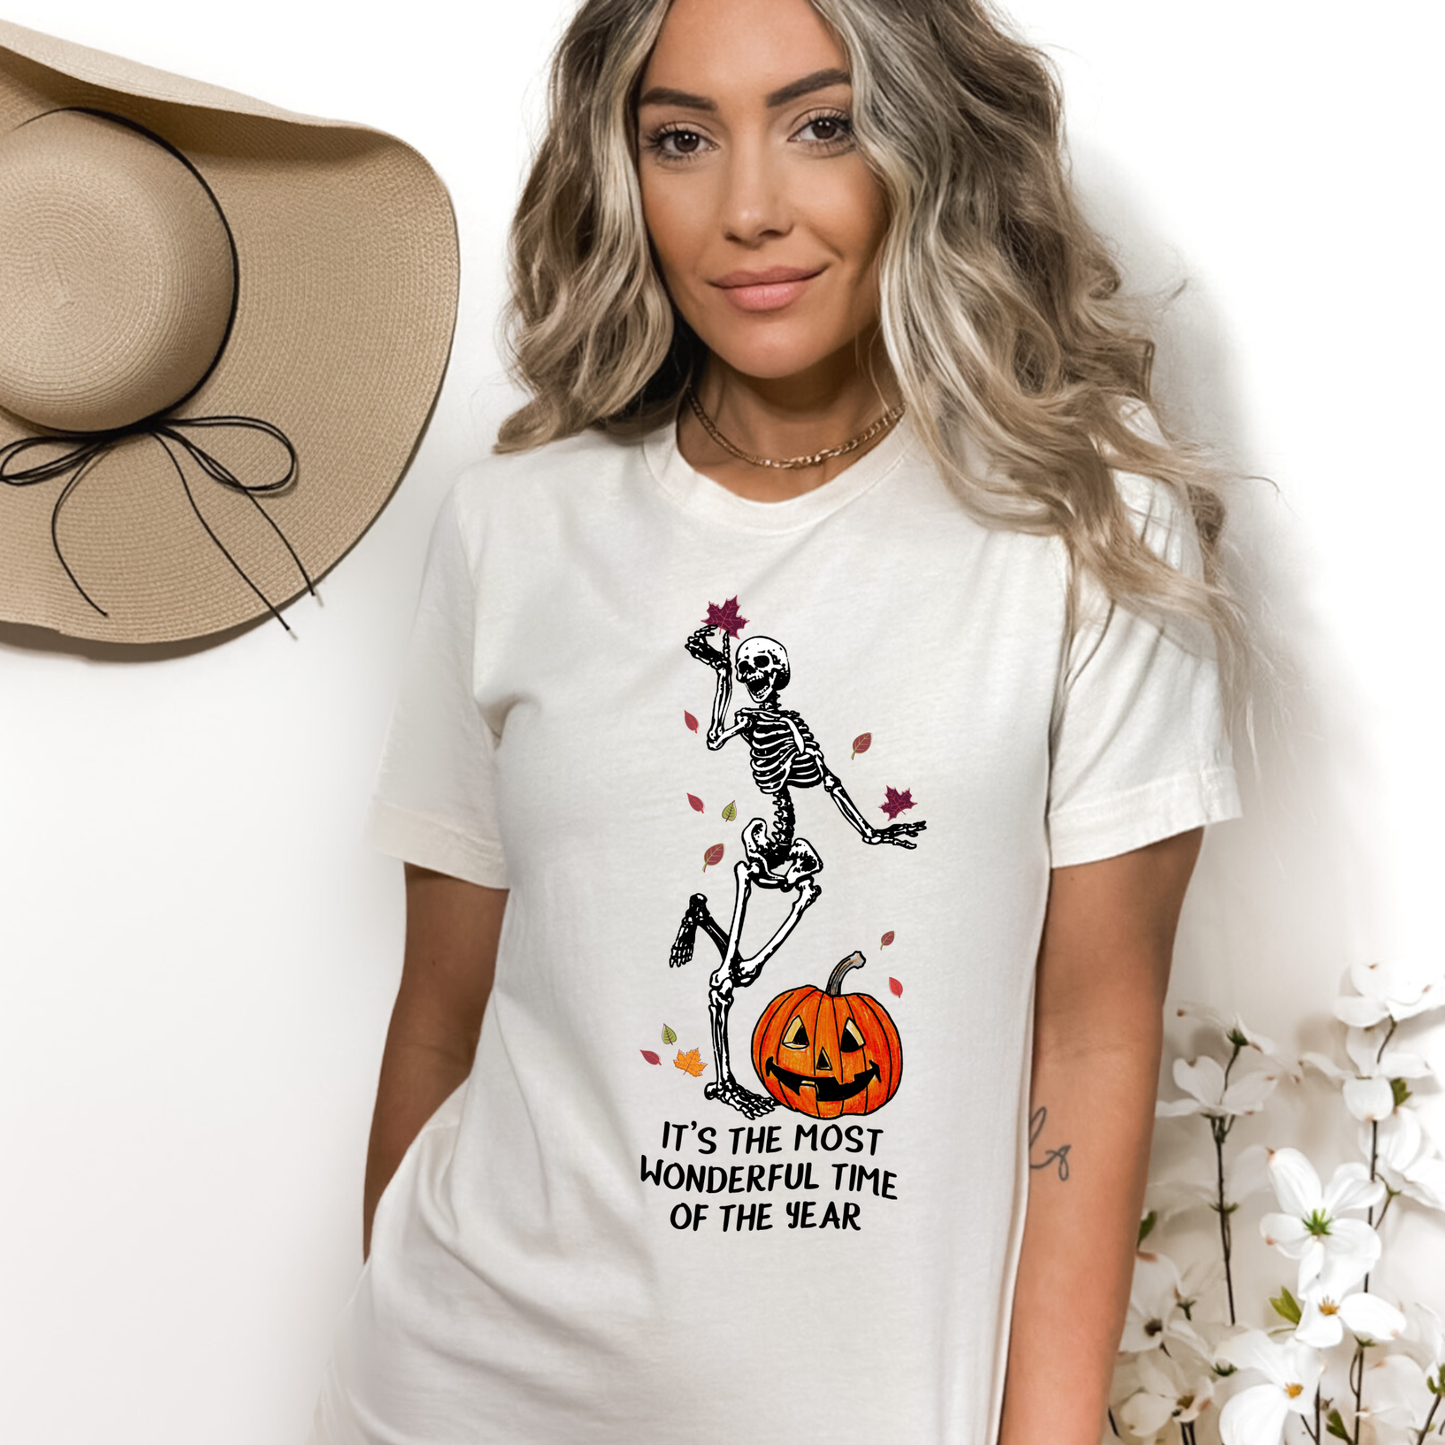 Most Wonderful Time of the Year - Halloween Graphic Tee